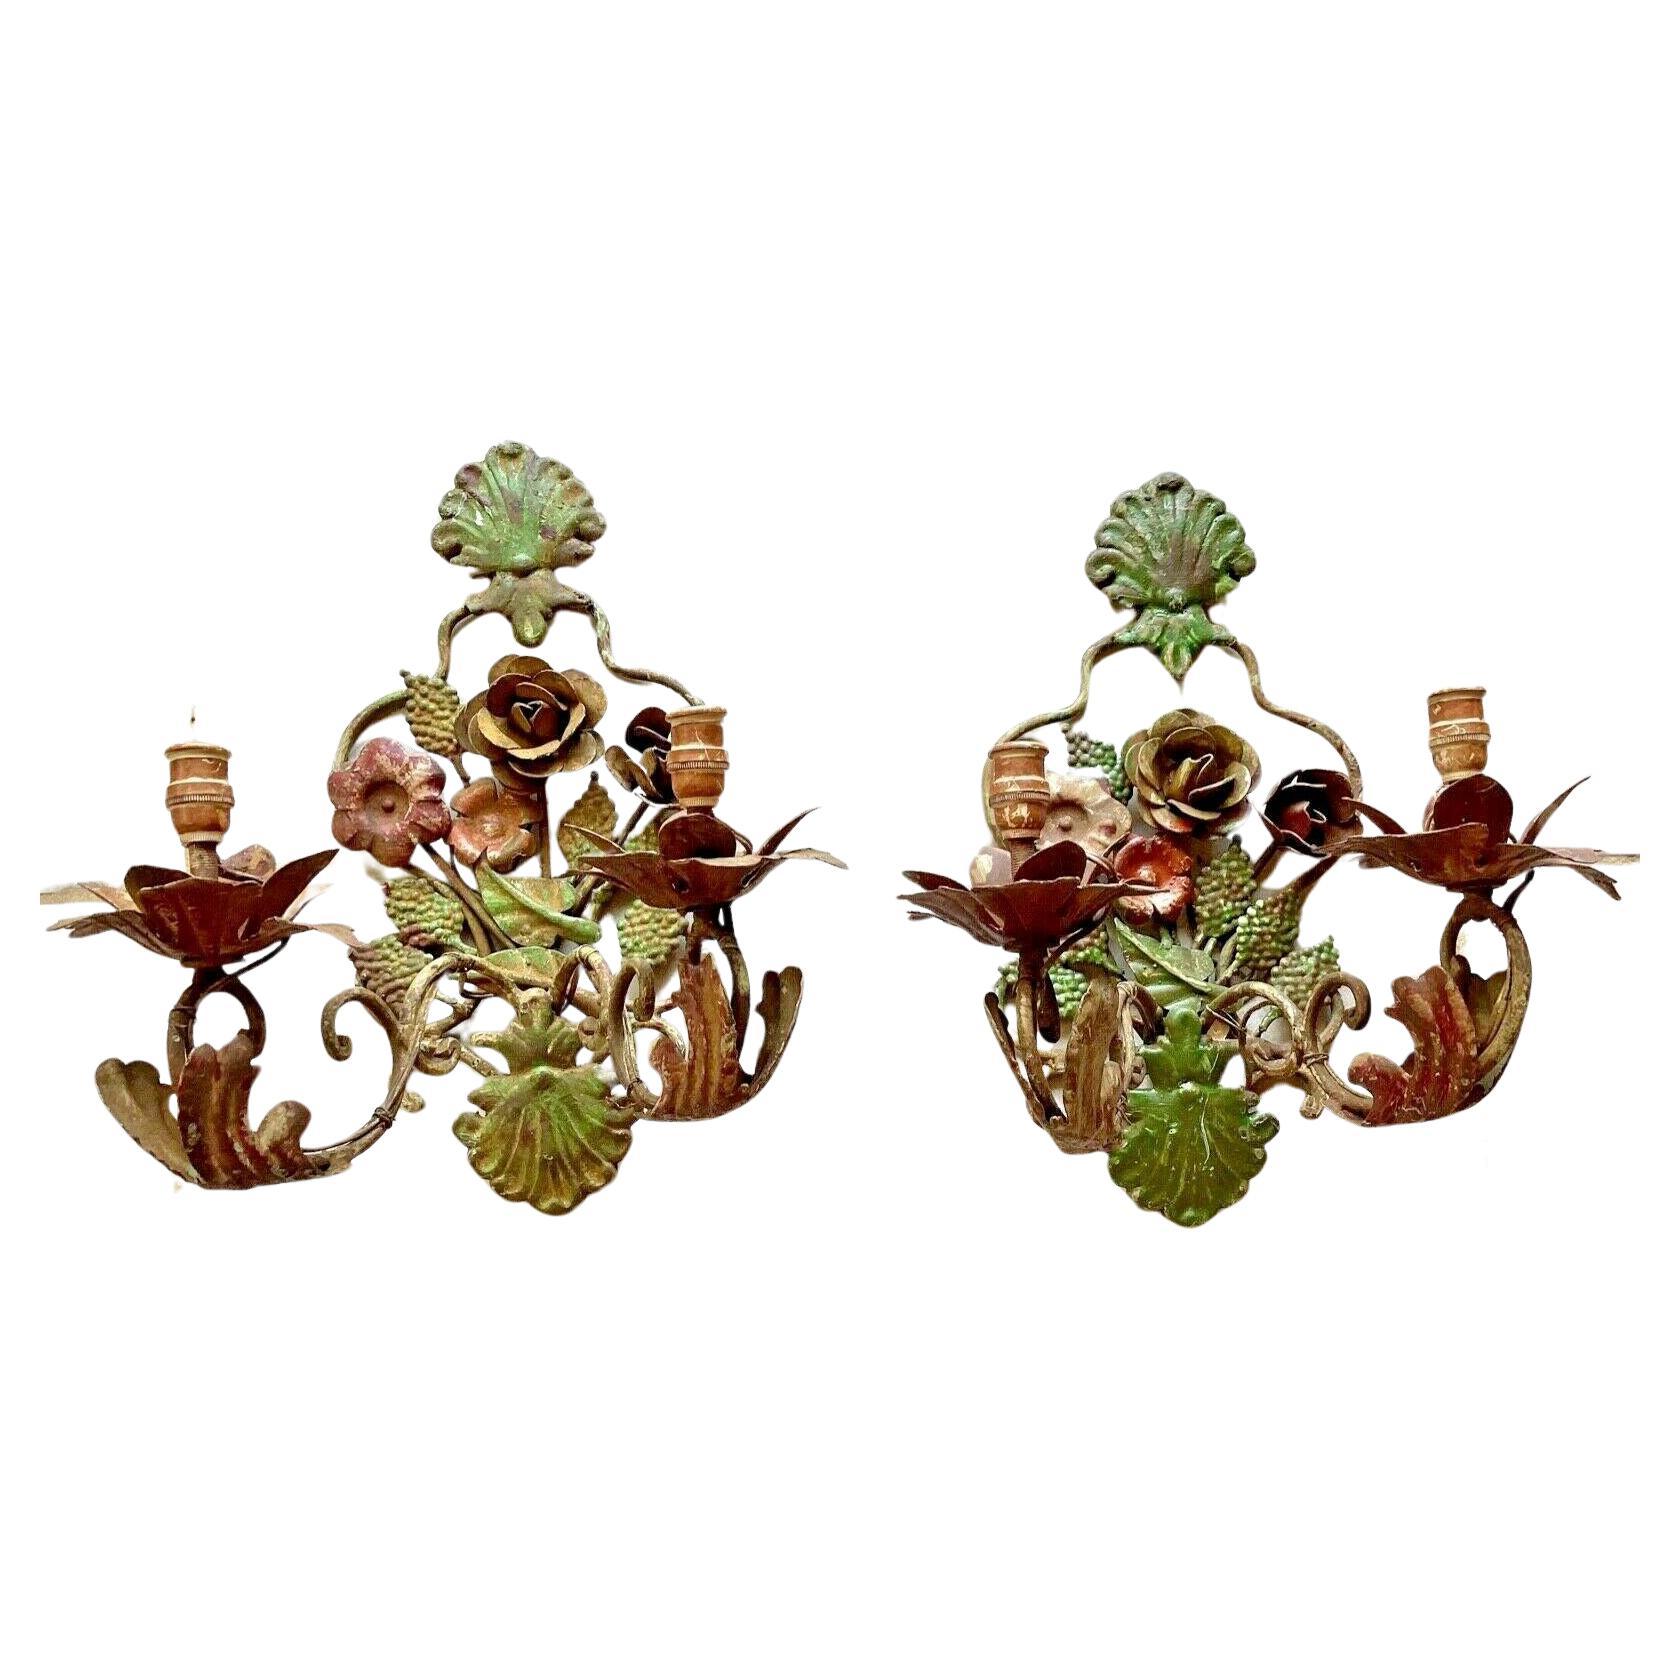 Lovely Pair of French Napoleon III Polychrome Iron Floral Form Wall Sconces. Original polychrome finish makes these sconces spectacular. Patinated Iron. French estate purchase.